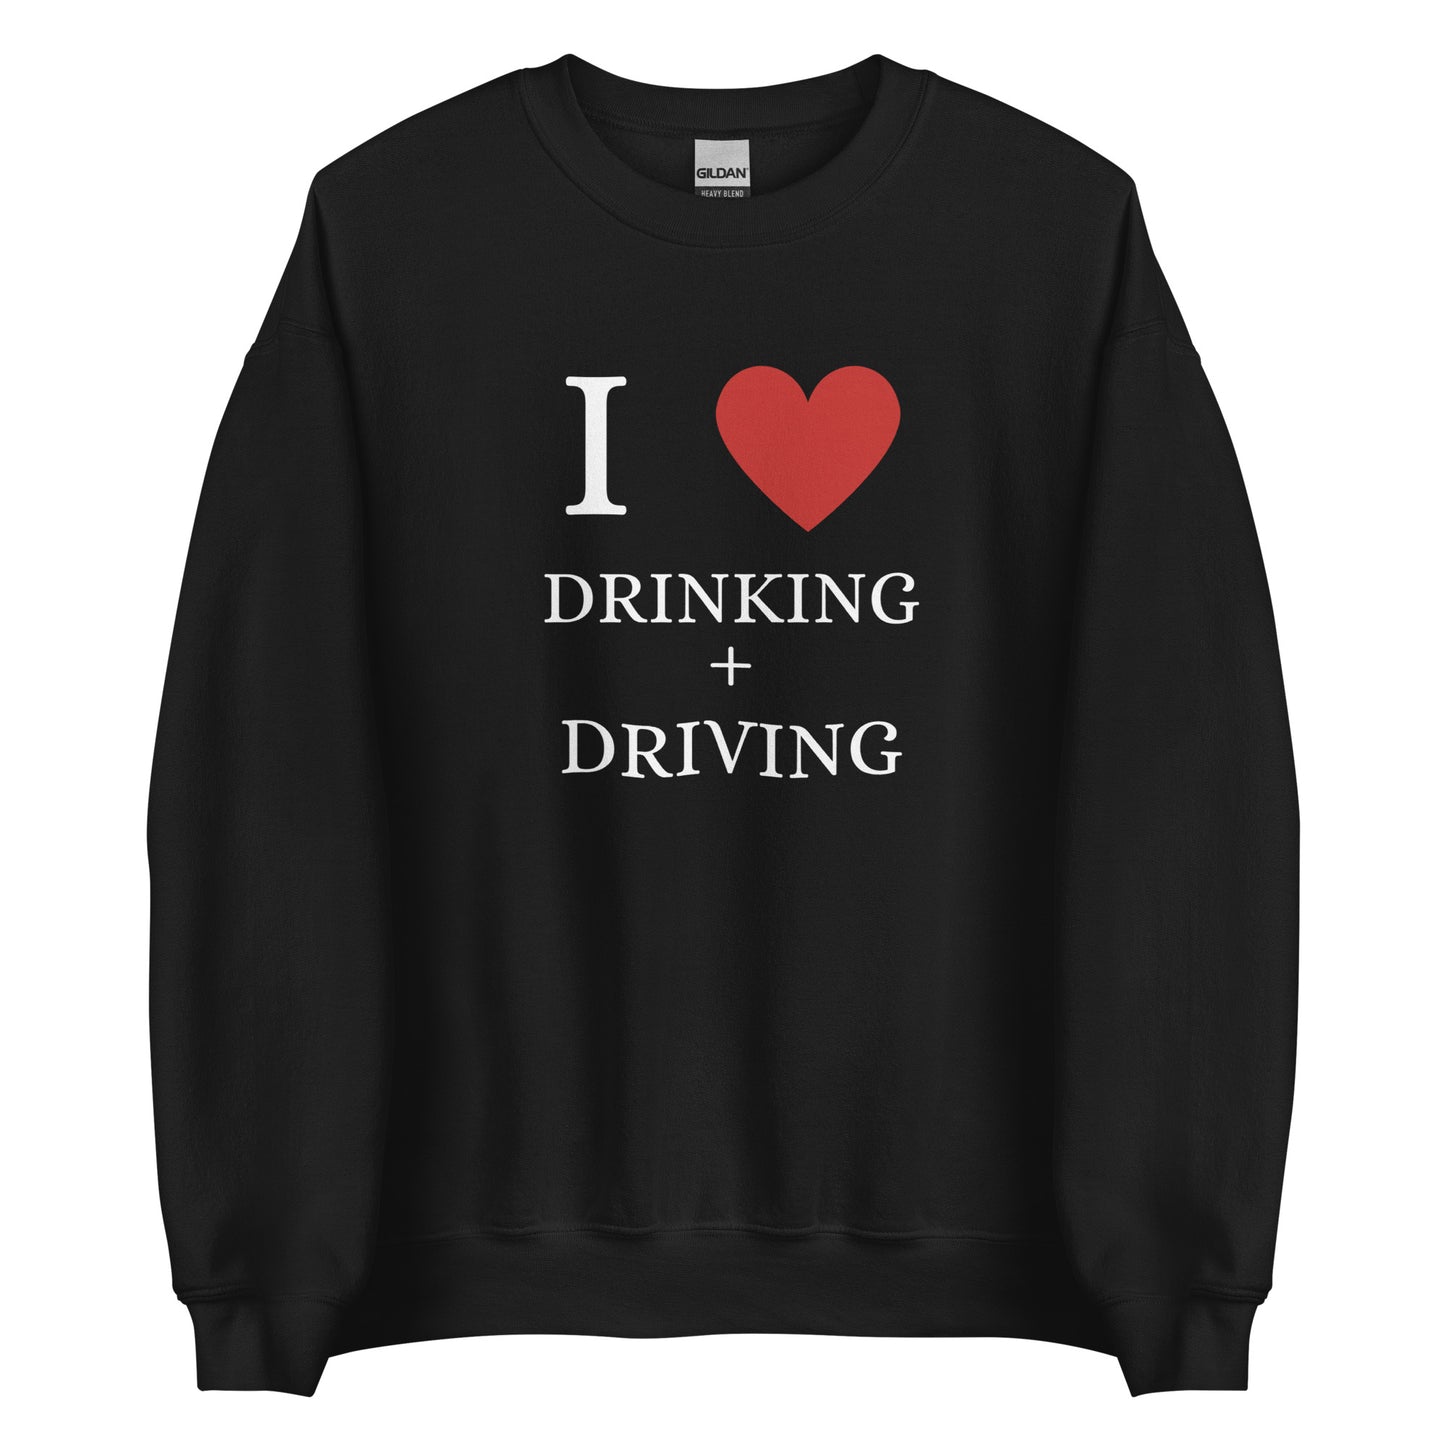 I LOVE DRINKING AND DRIVING